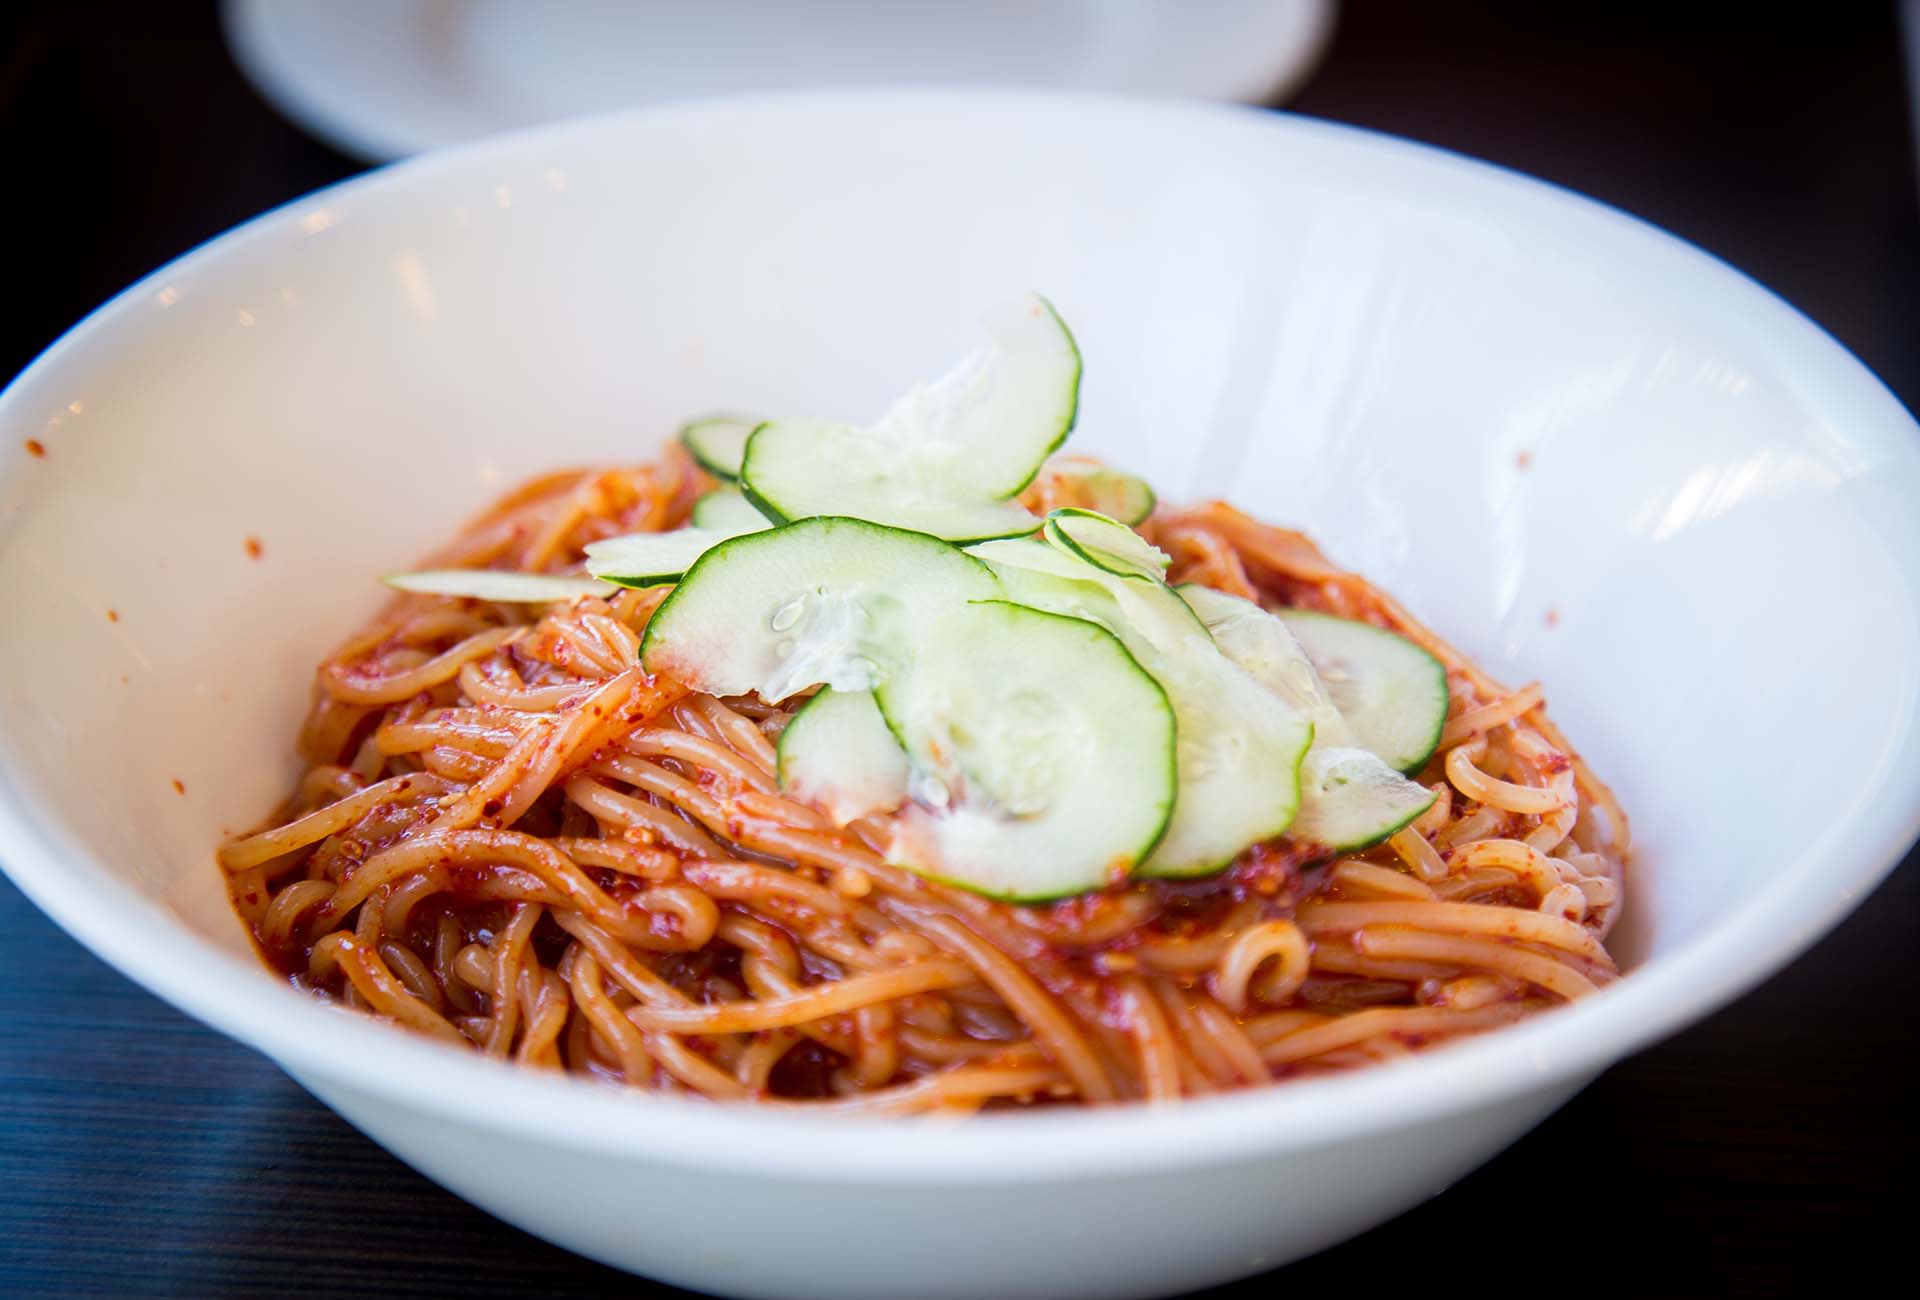 The chol-myun, or spicy cold noodles with cucumbers